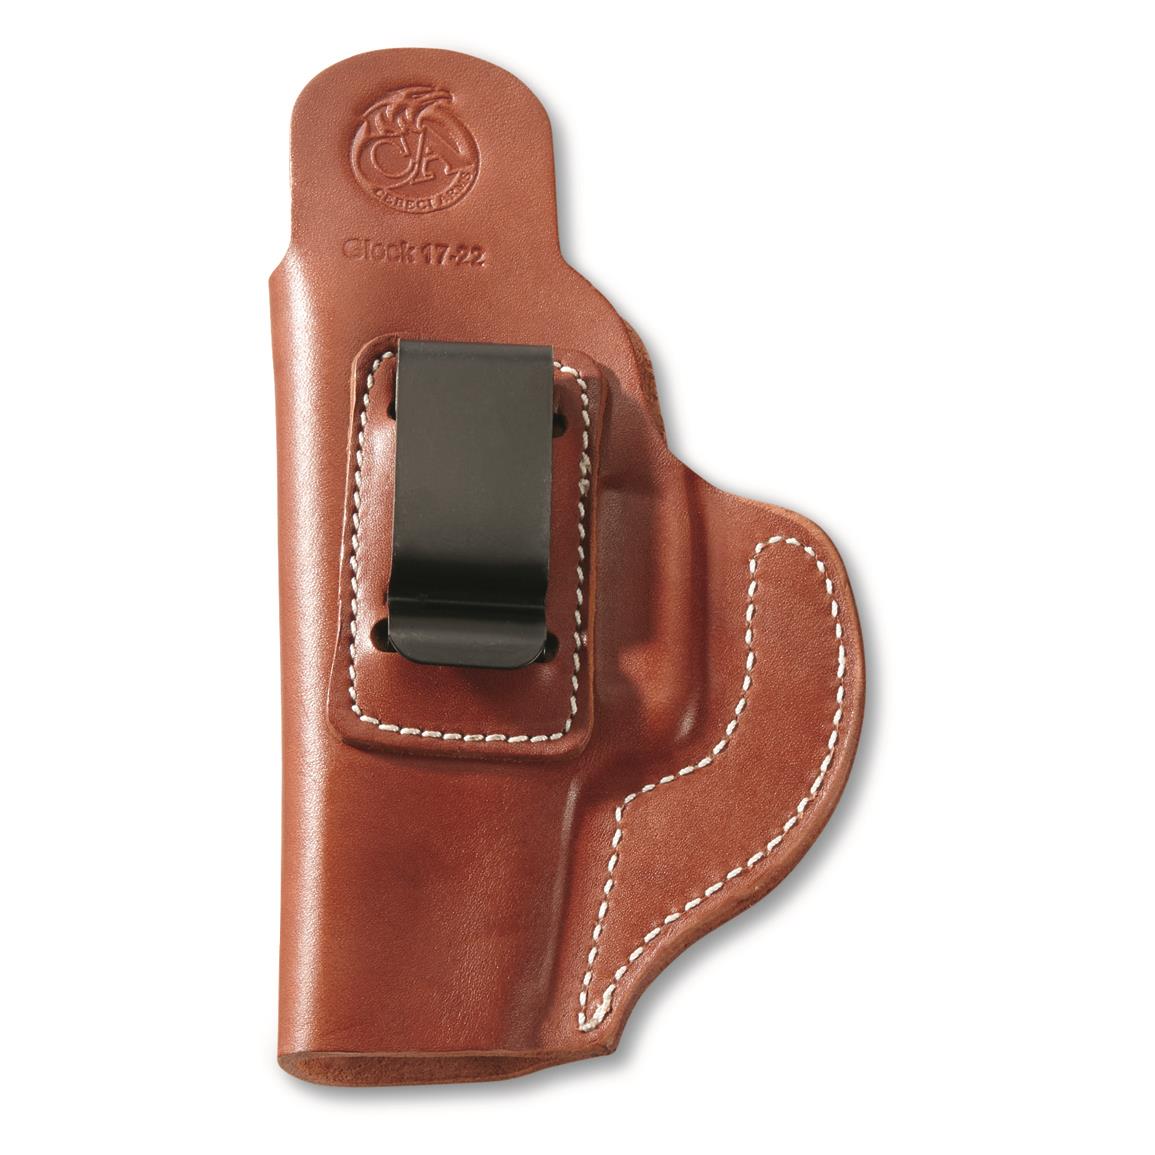 Cebeci Arms Leather OWB Holster, Glock 17/22, Right Hand